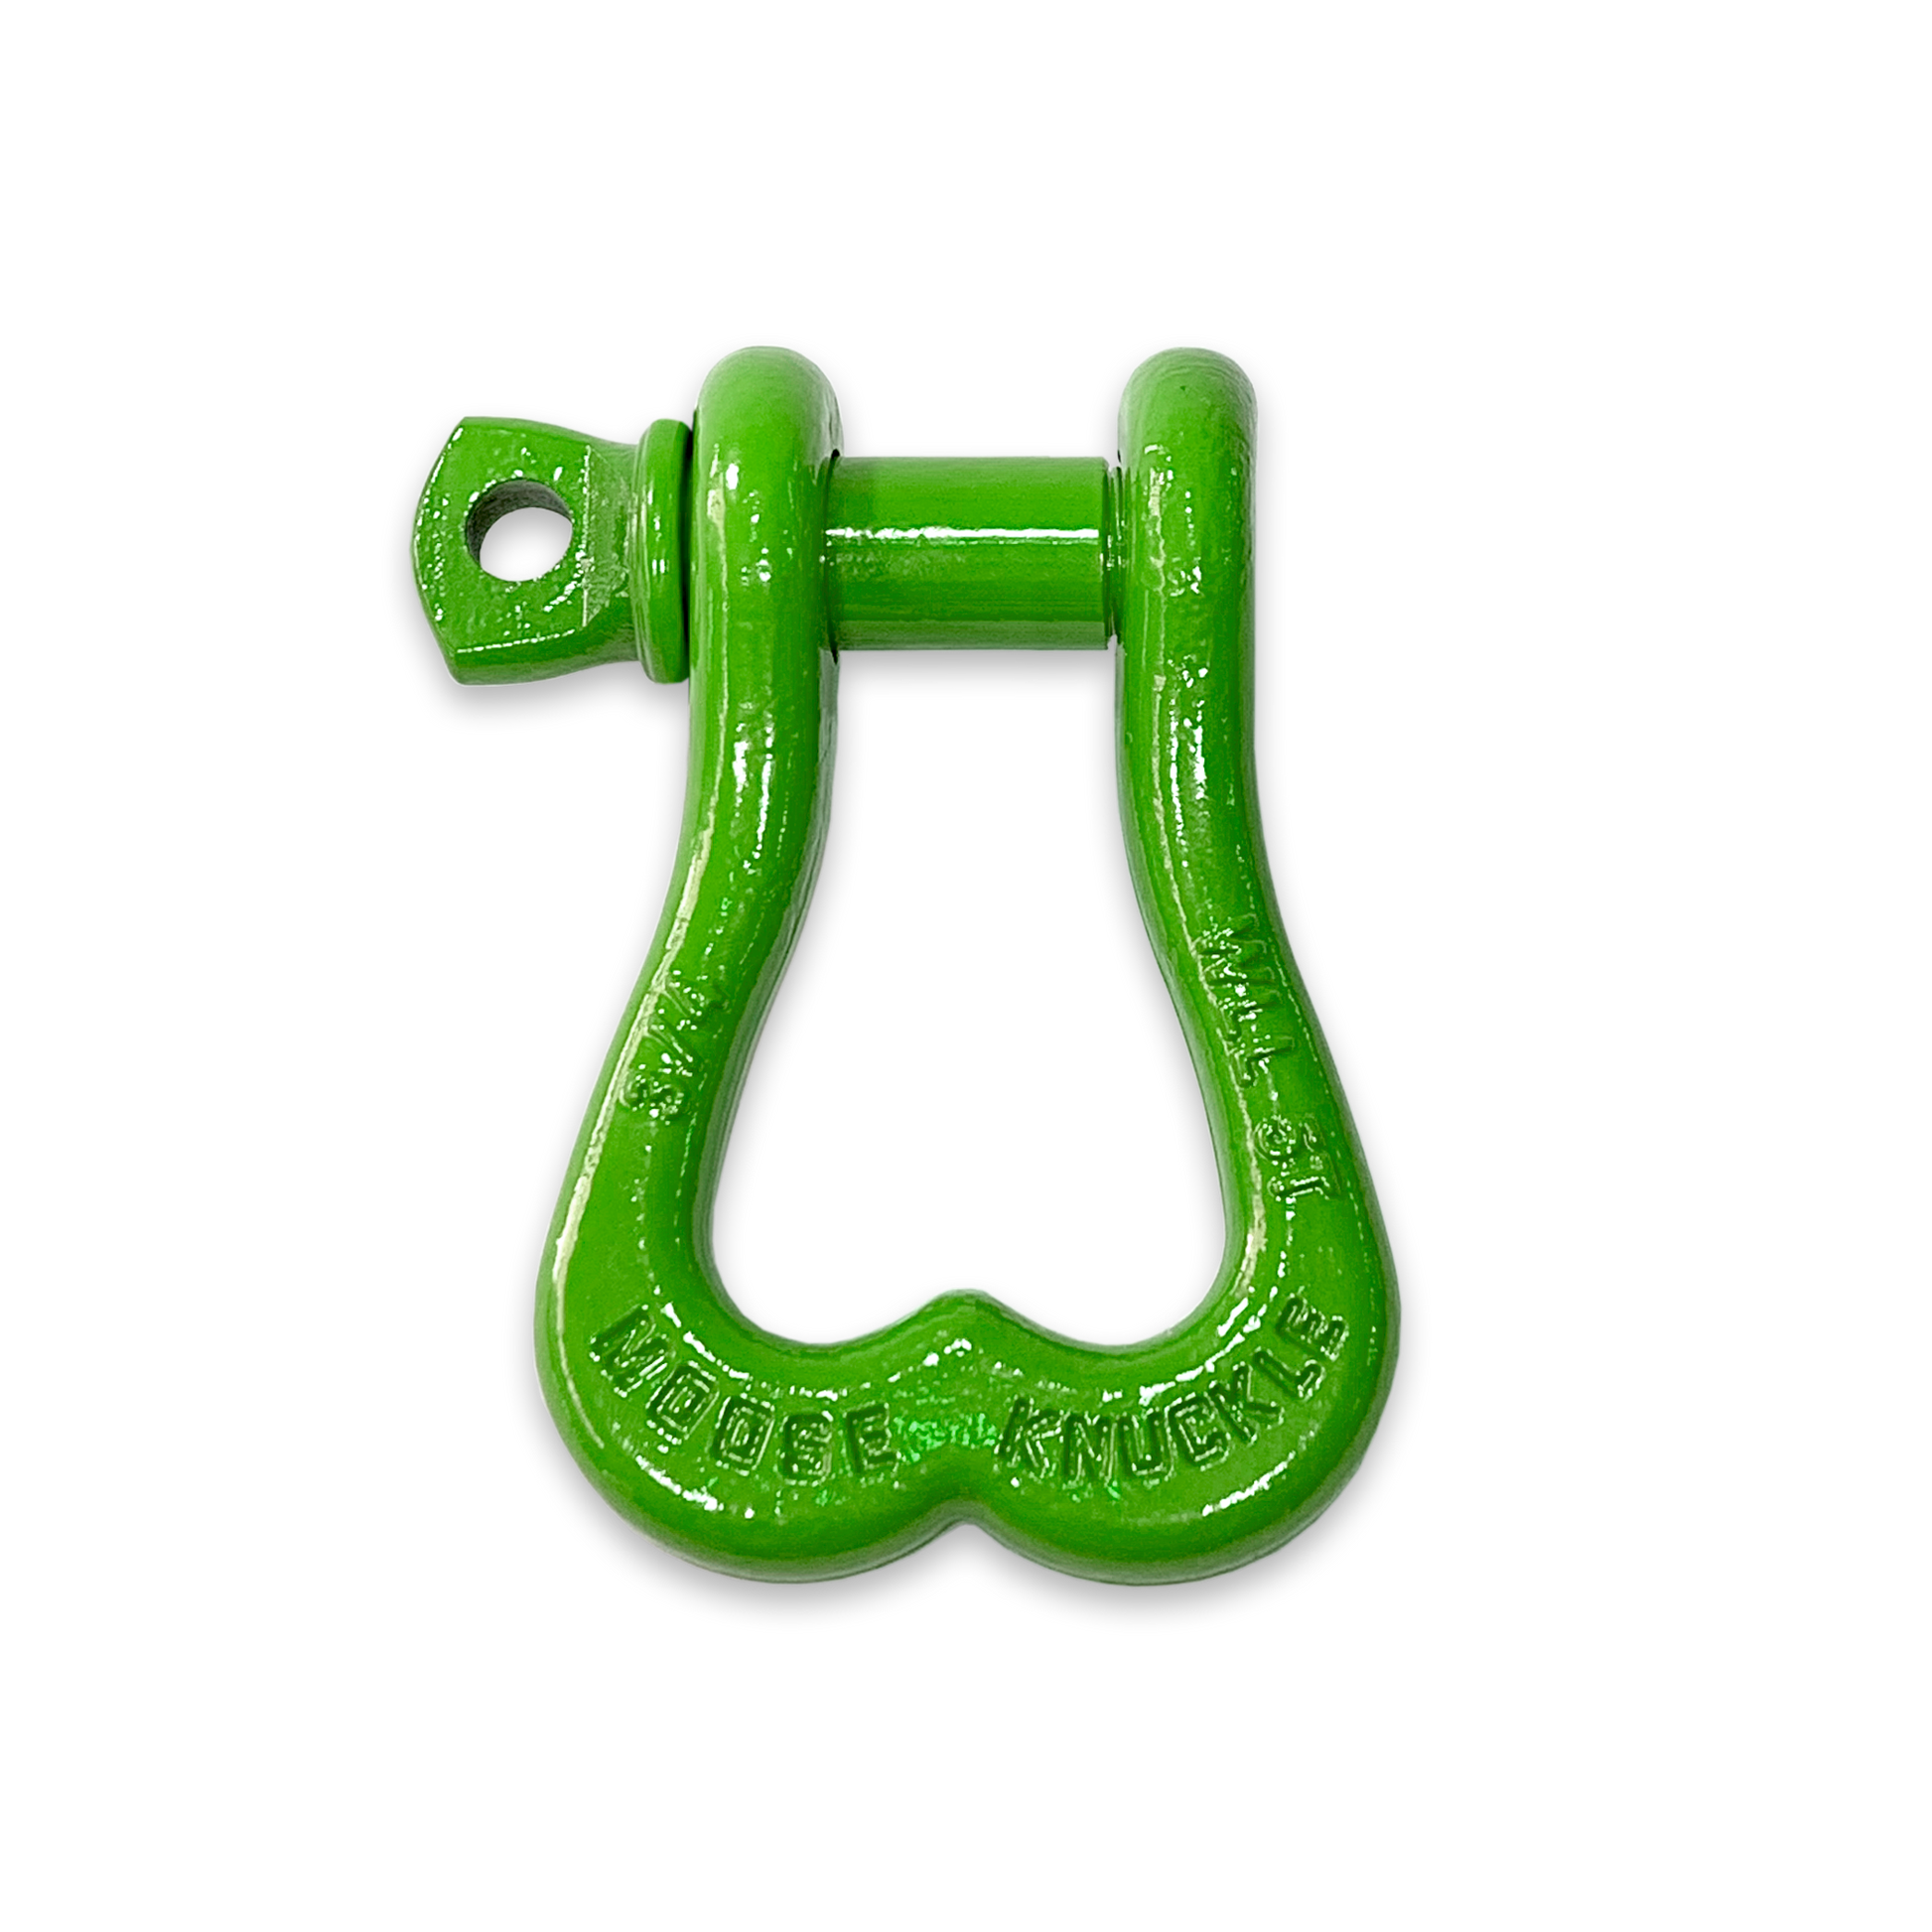 Moose Knuckle XL Sublime Green D-Ring 3/4" Shackle for Towing Off-Road Jeep, Tacoma, 4-Runner, 4x4 Truck and SxS Vehicle Recovery